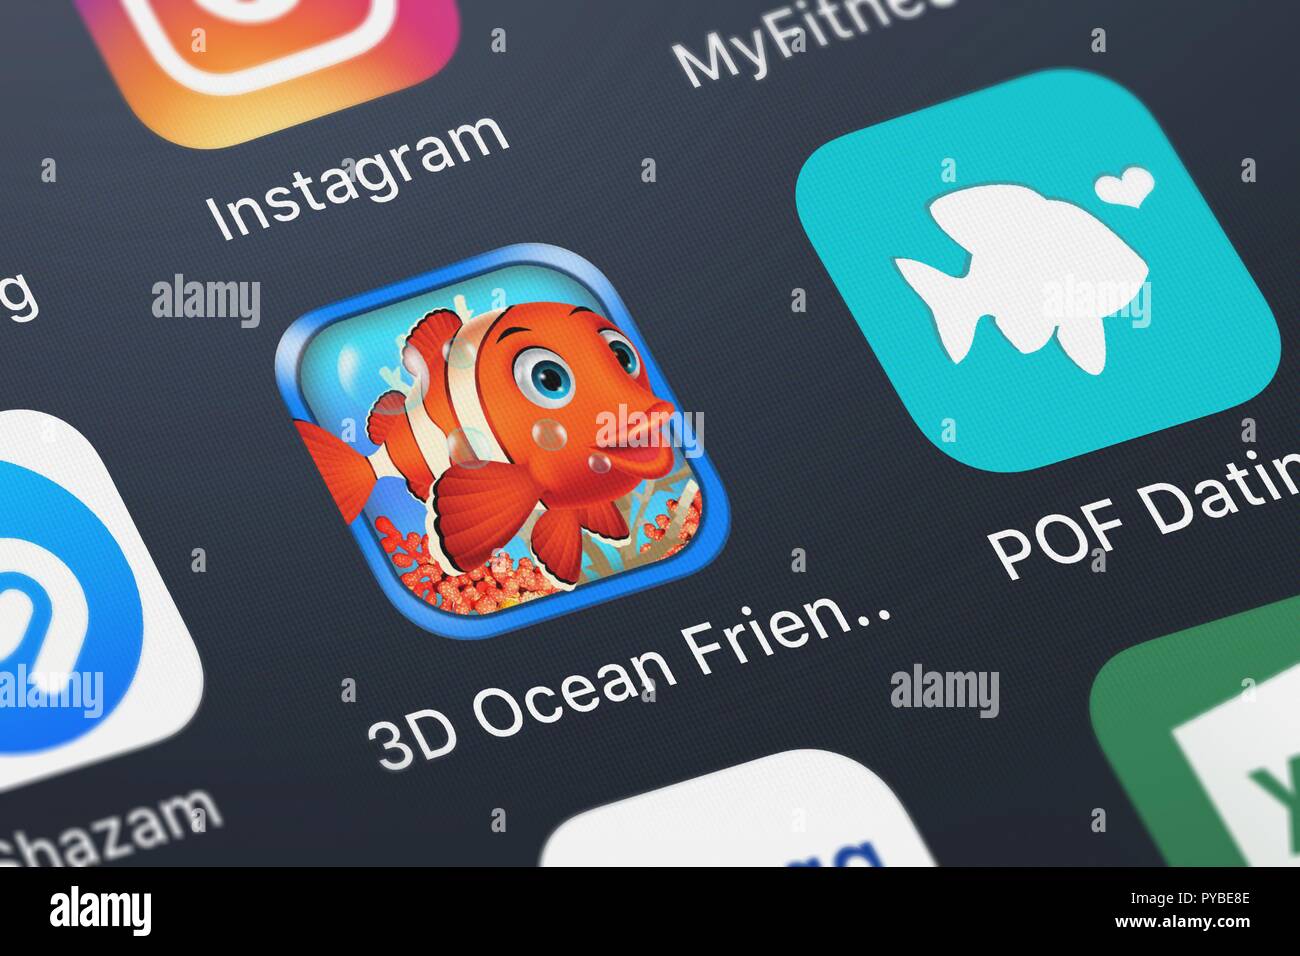 London, United Kingdom - October 26, 2018: Icon of the mobile app 3D Ocean Friends Pet Racing Game FREE from uTappz Mobile Development LLC on an iPhon Stock Photo